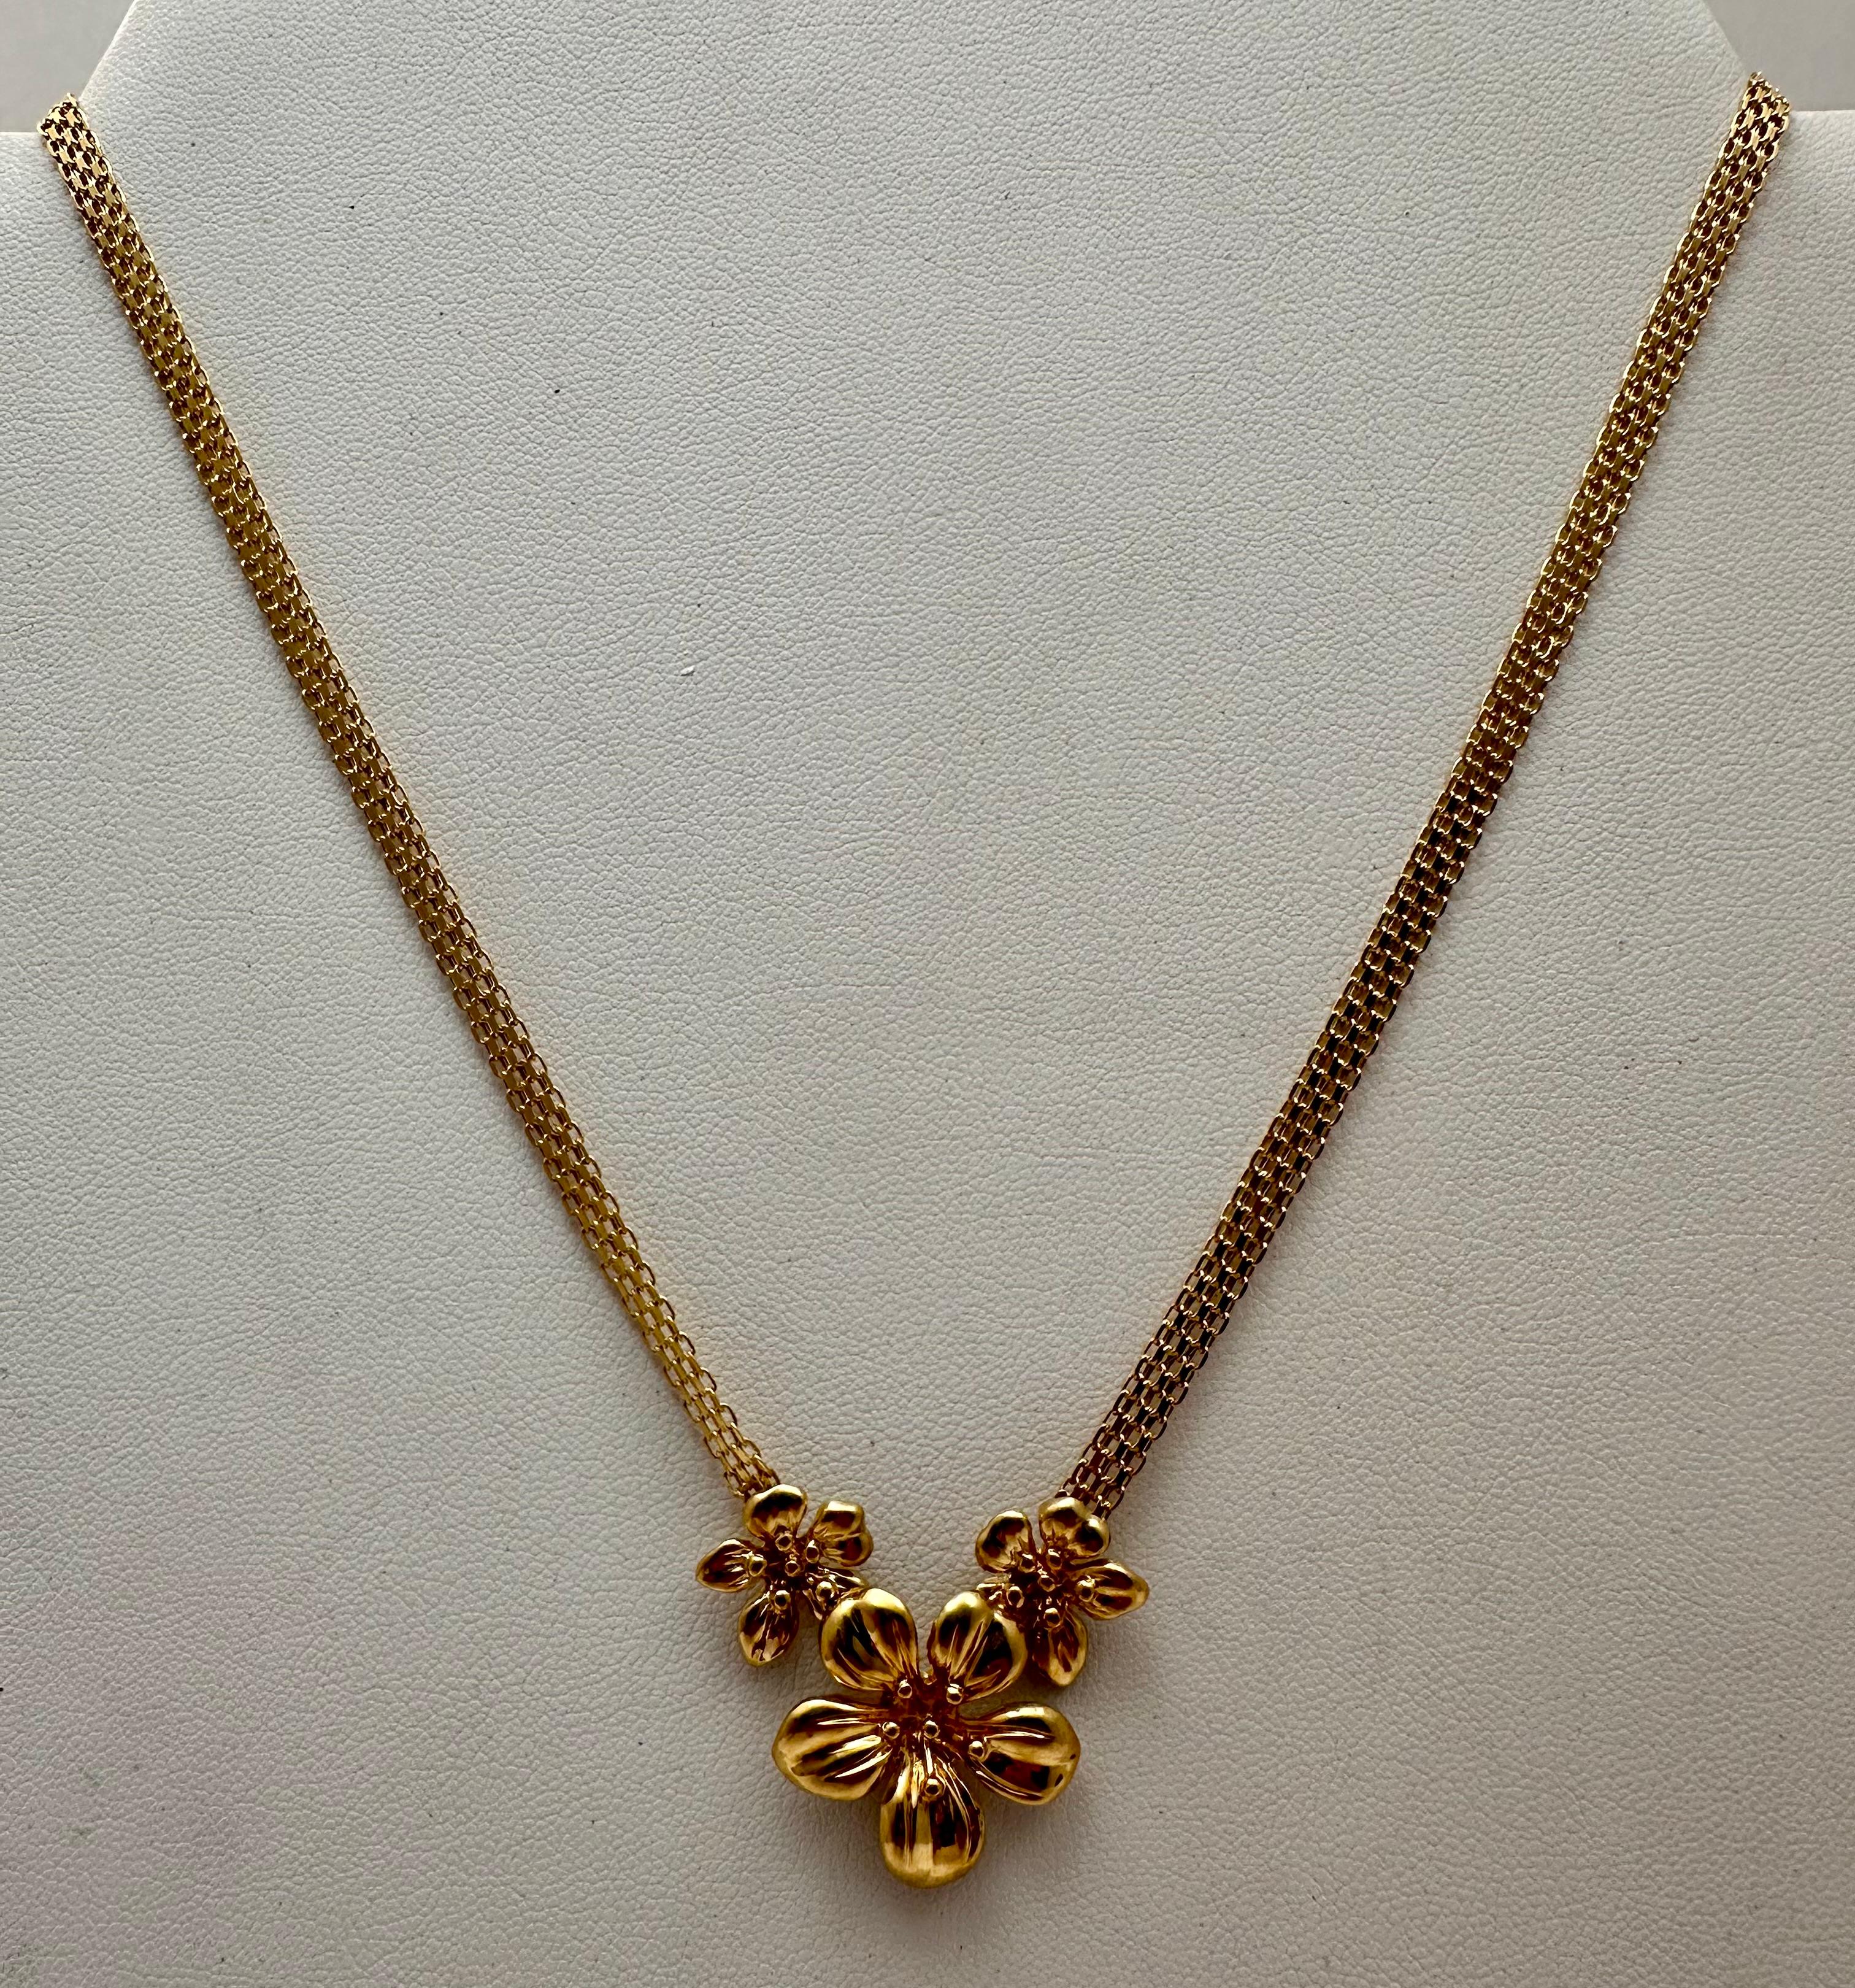 Feel like a queen with this stunning 14 karat yellow gold choker necklace. Featuring an exquisite floral design, this piece is perfect for formal occasions or to add a touch of glamour to your everyday wardrobe. The wide 5mm chain sits comfortably